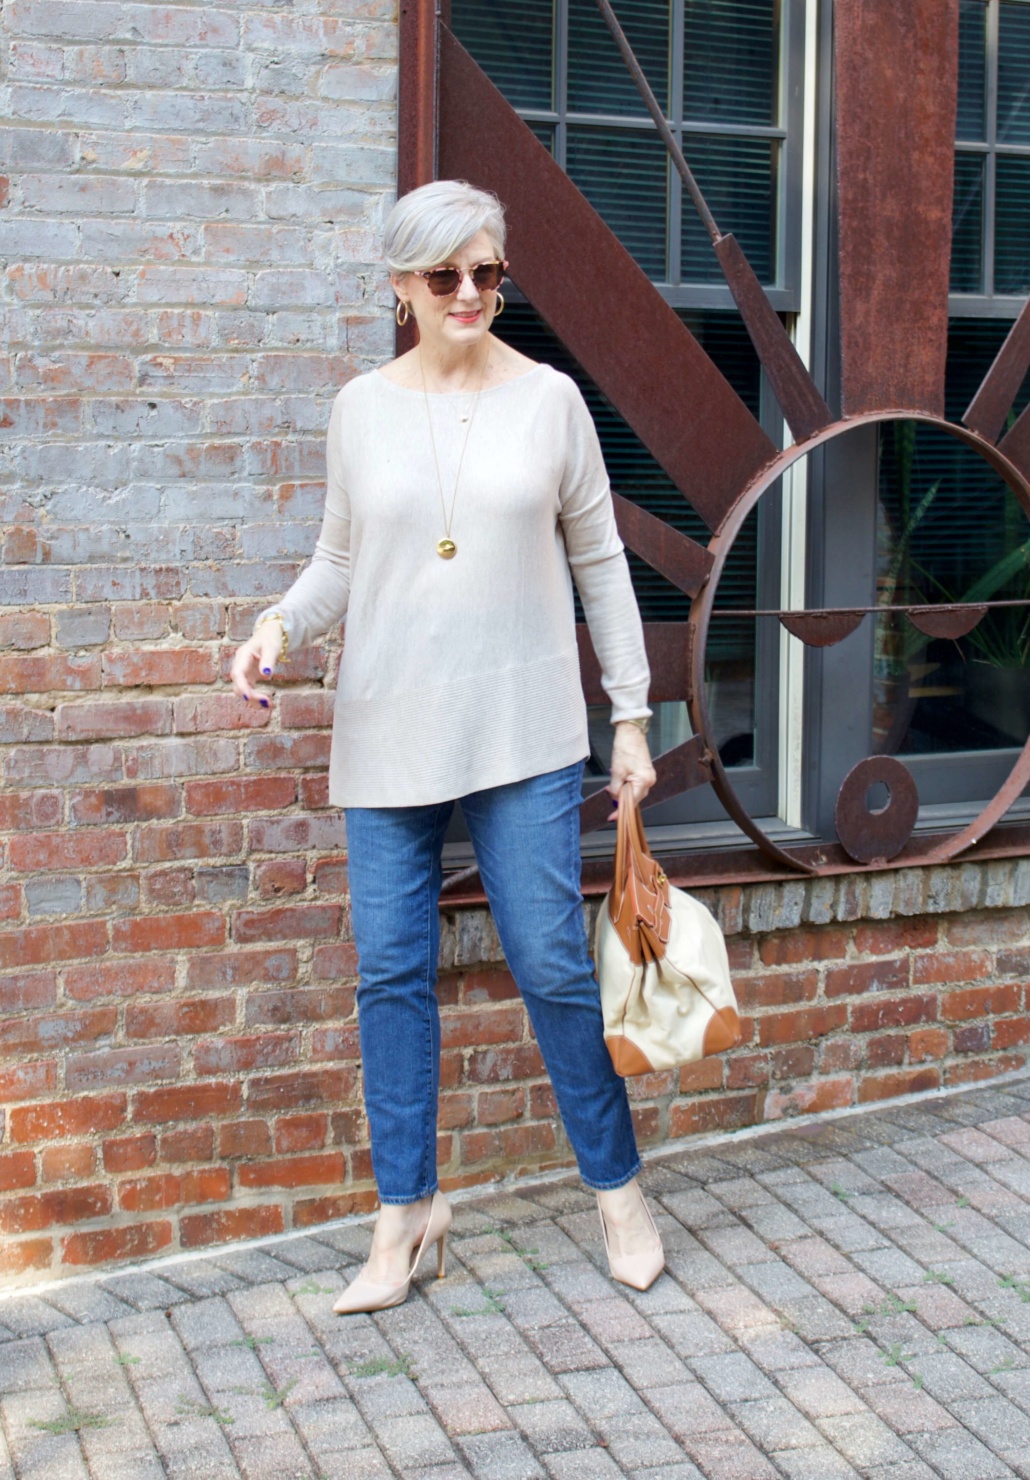 back to summer basics tunic, blue jeans, nude pumps and canvas handbag